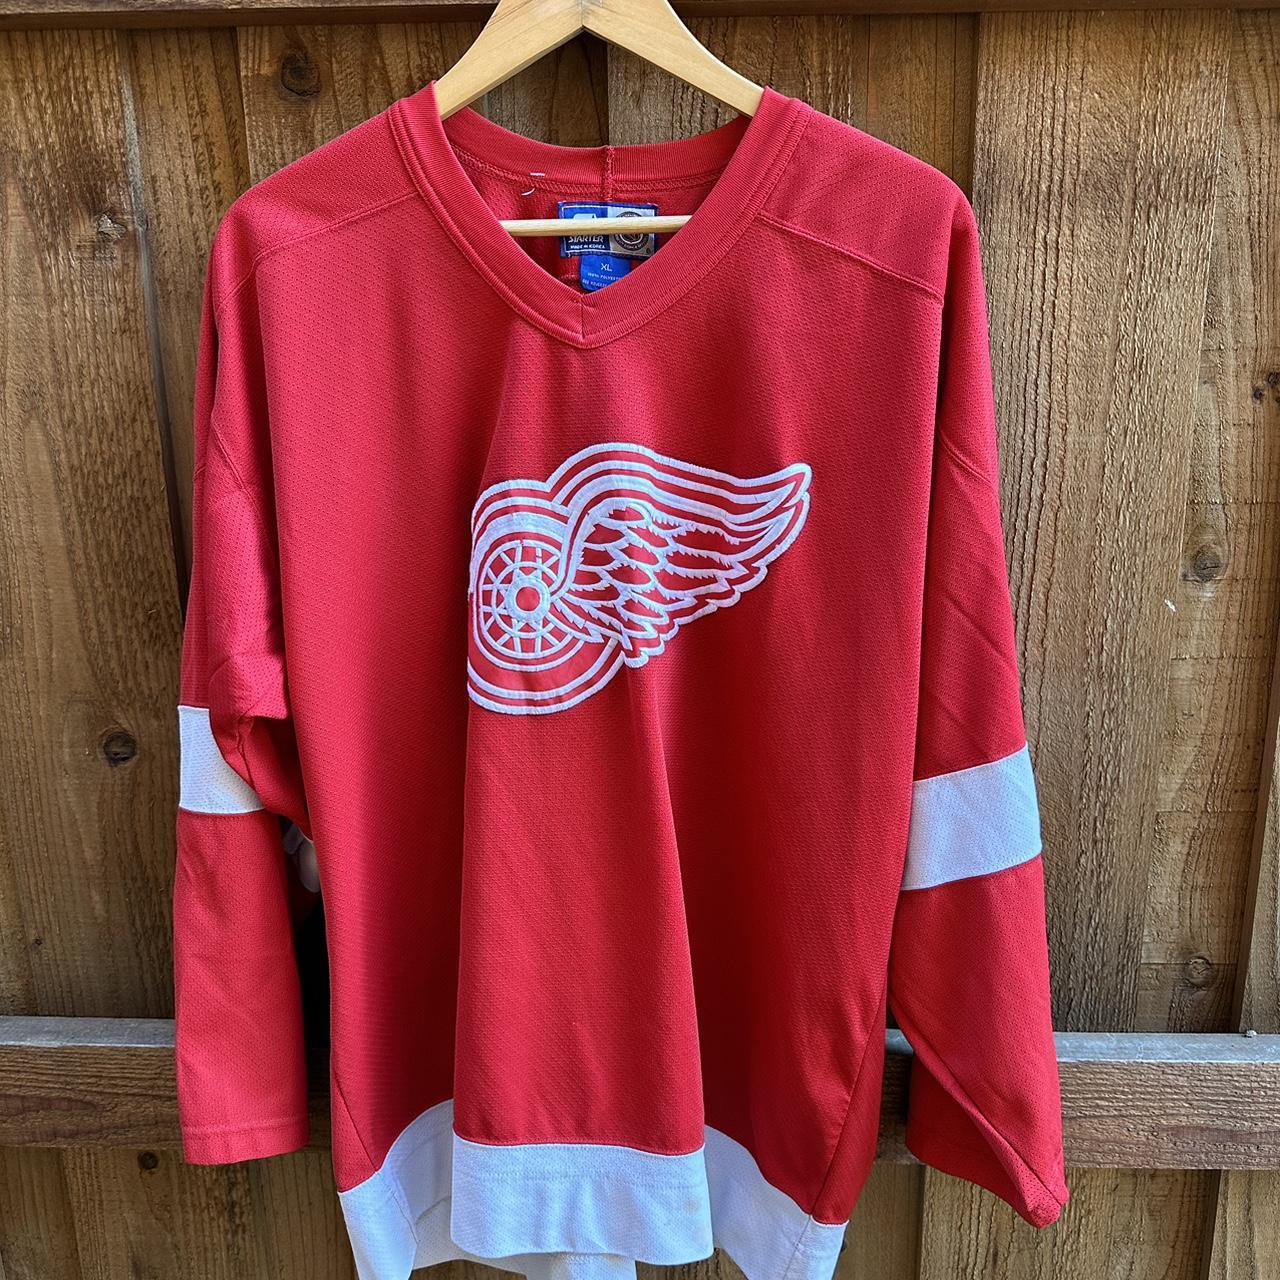 Vintage Detroit Red Wings Starter Hockey Jersey Size Large White